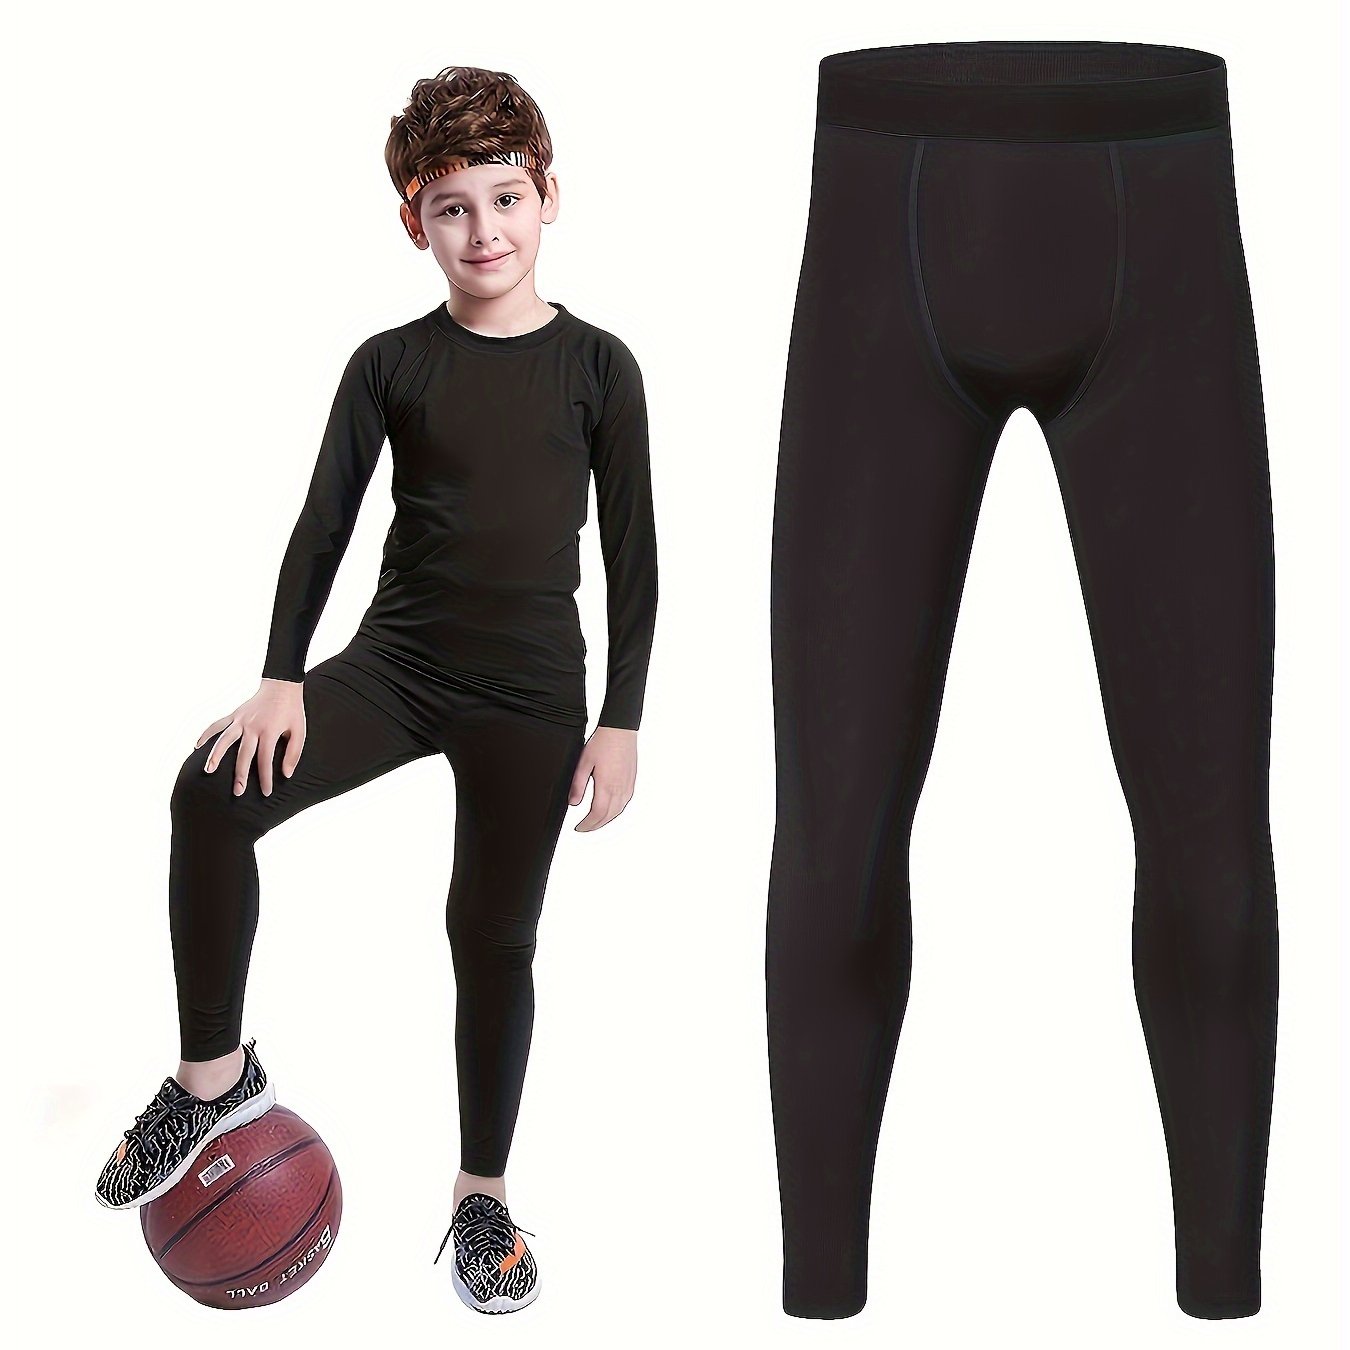  Boys Leggings Quick Dry Youth Compression Pants Sports Tights  Basketball Base Layer Black XS